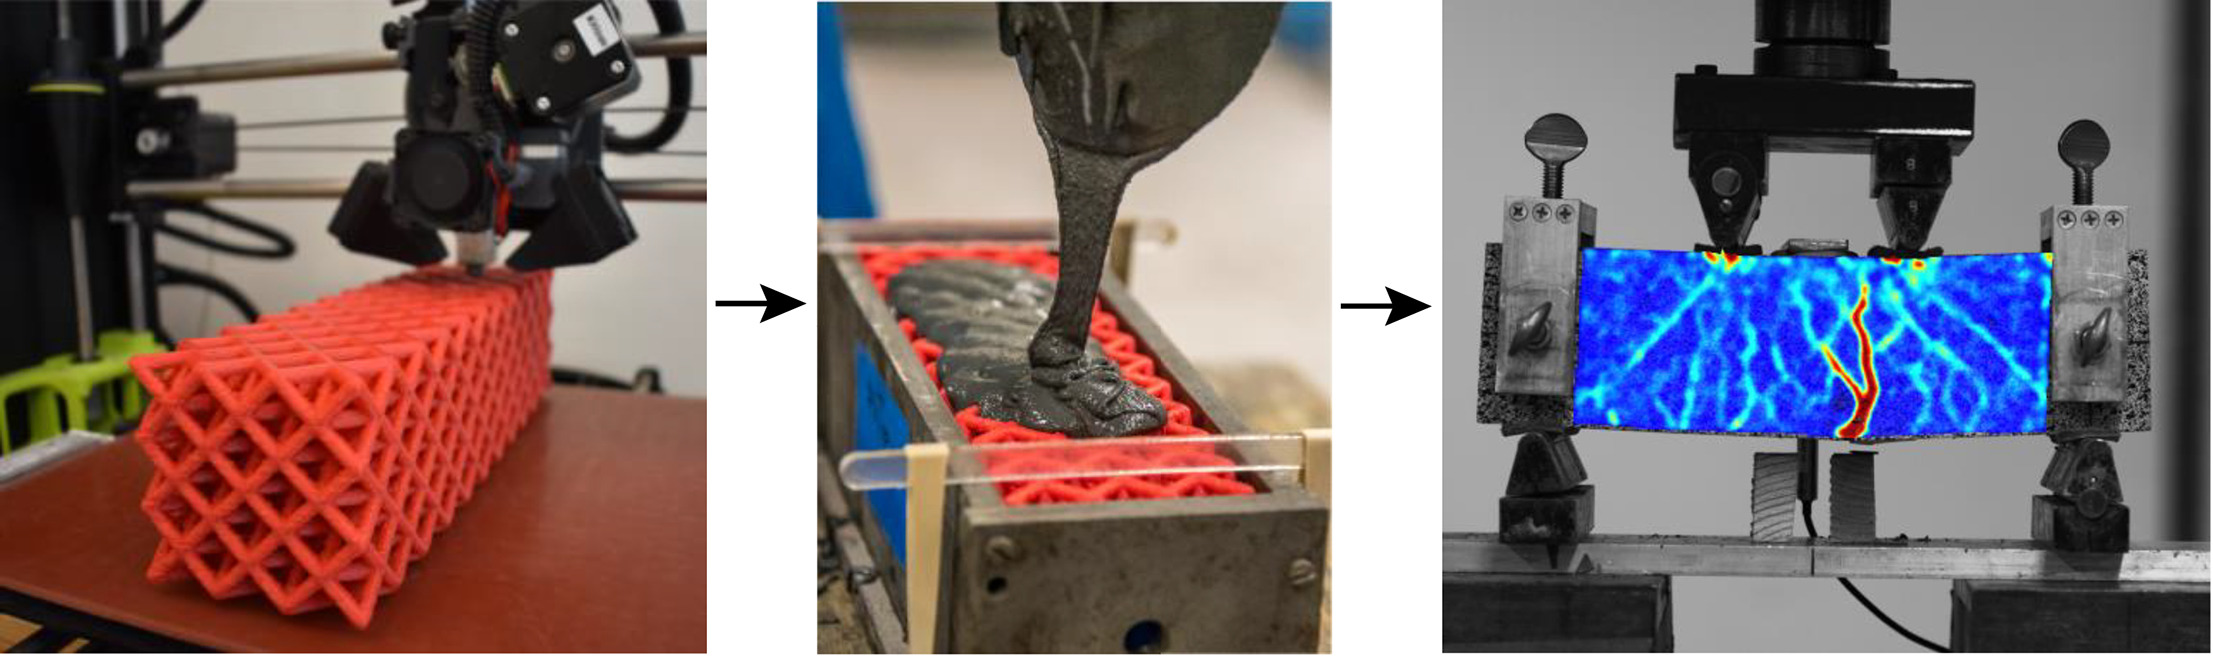 Printing, filling, and testing the lattice structure. Photos via UC Berkeley.